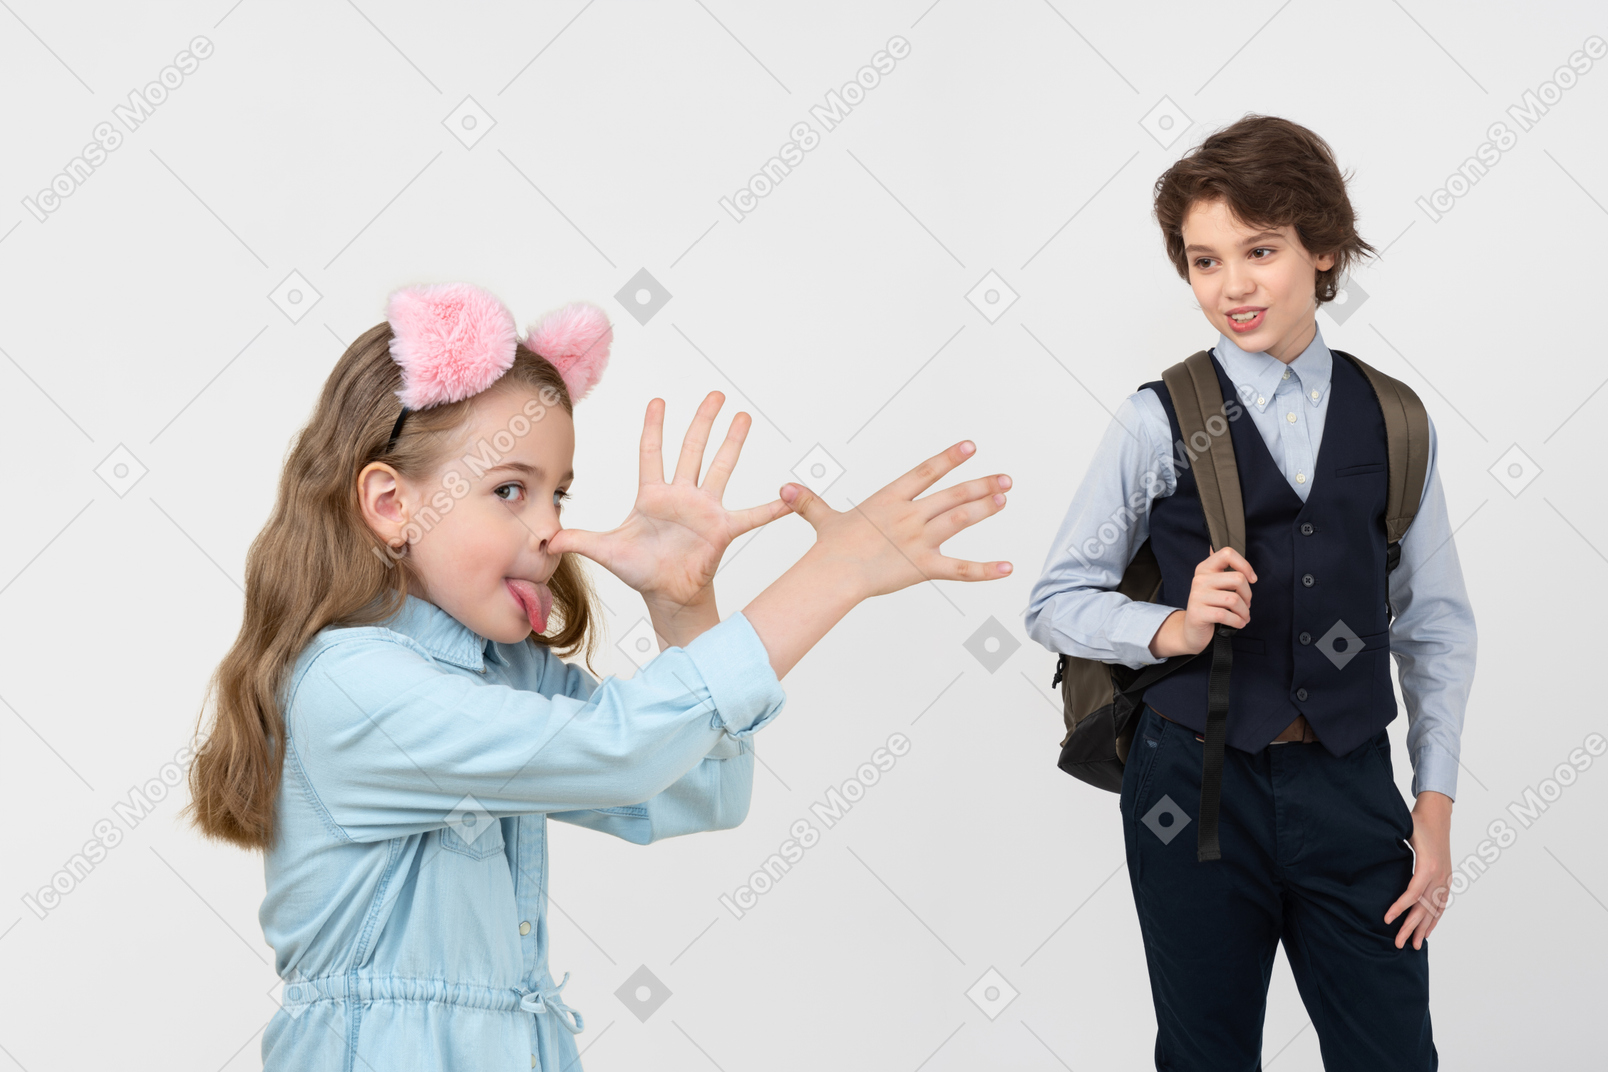 Little girl making faces and a school boy laughing at her